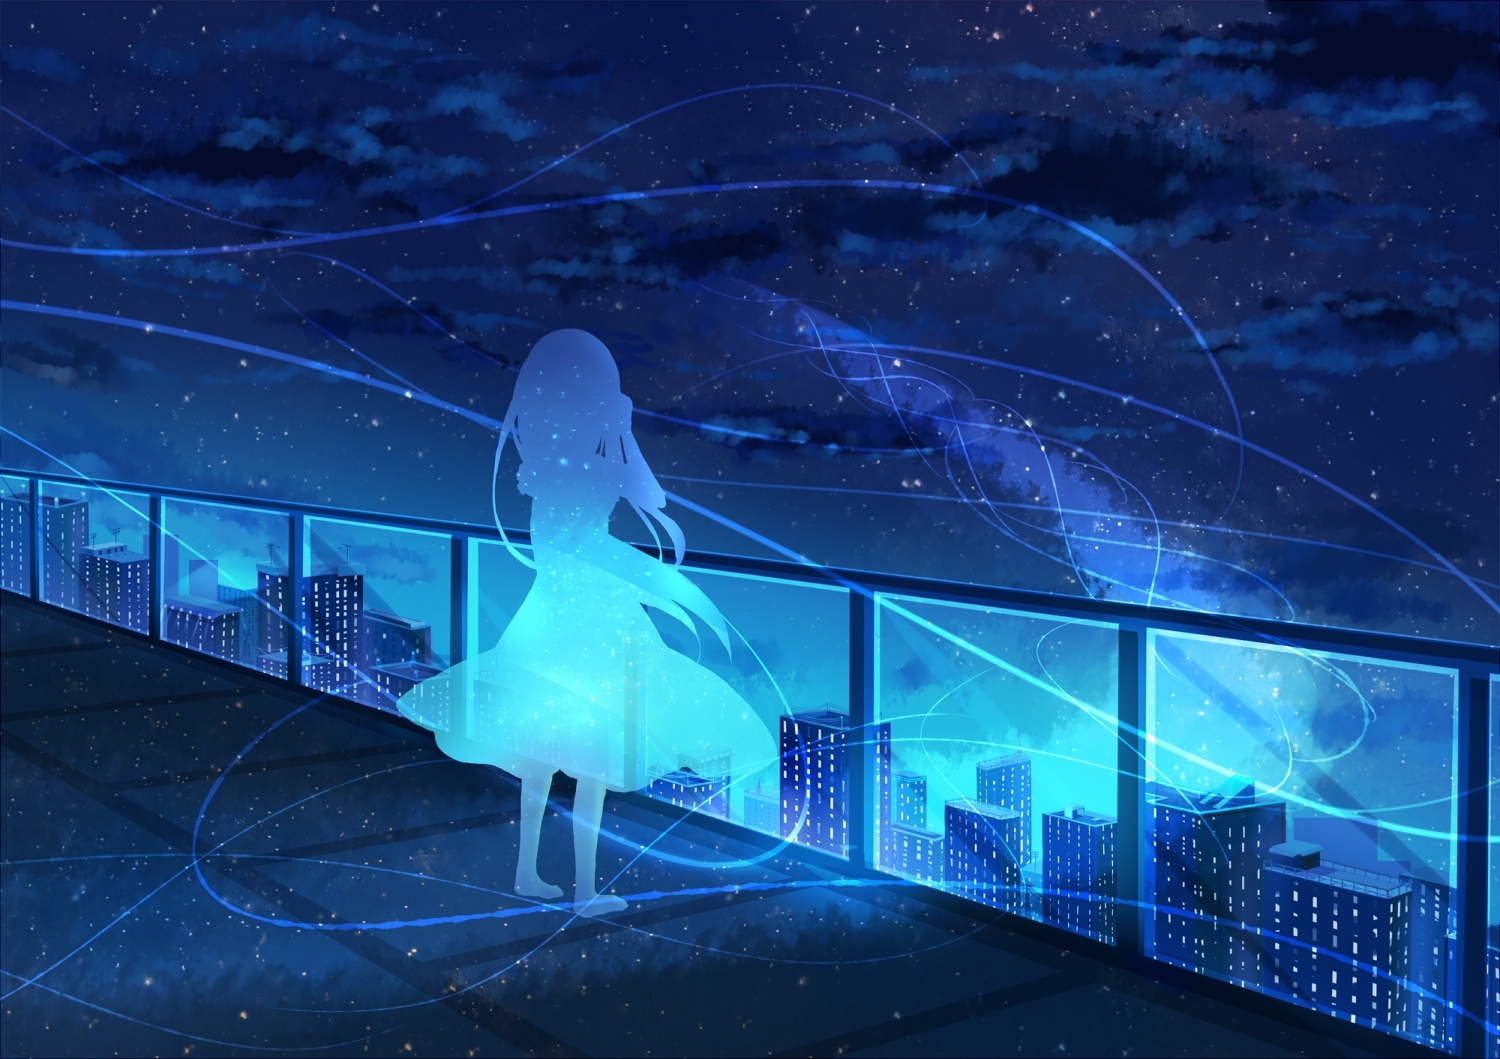 Wallpaper Rooftop, Fence, Anime Girl Silhouette, Night, Scenic, Stars ...